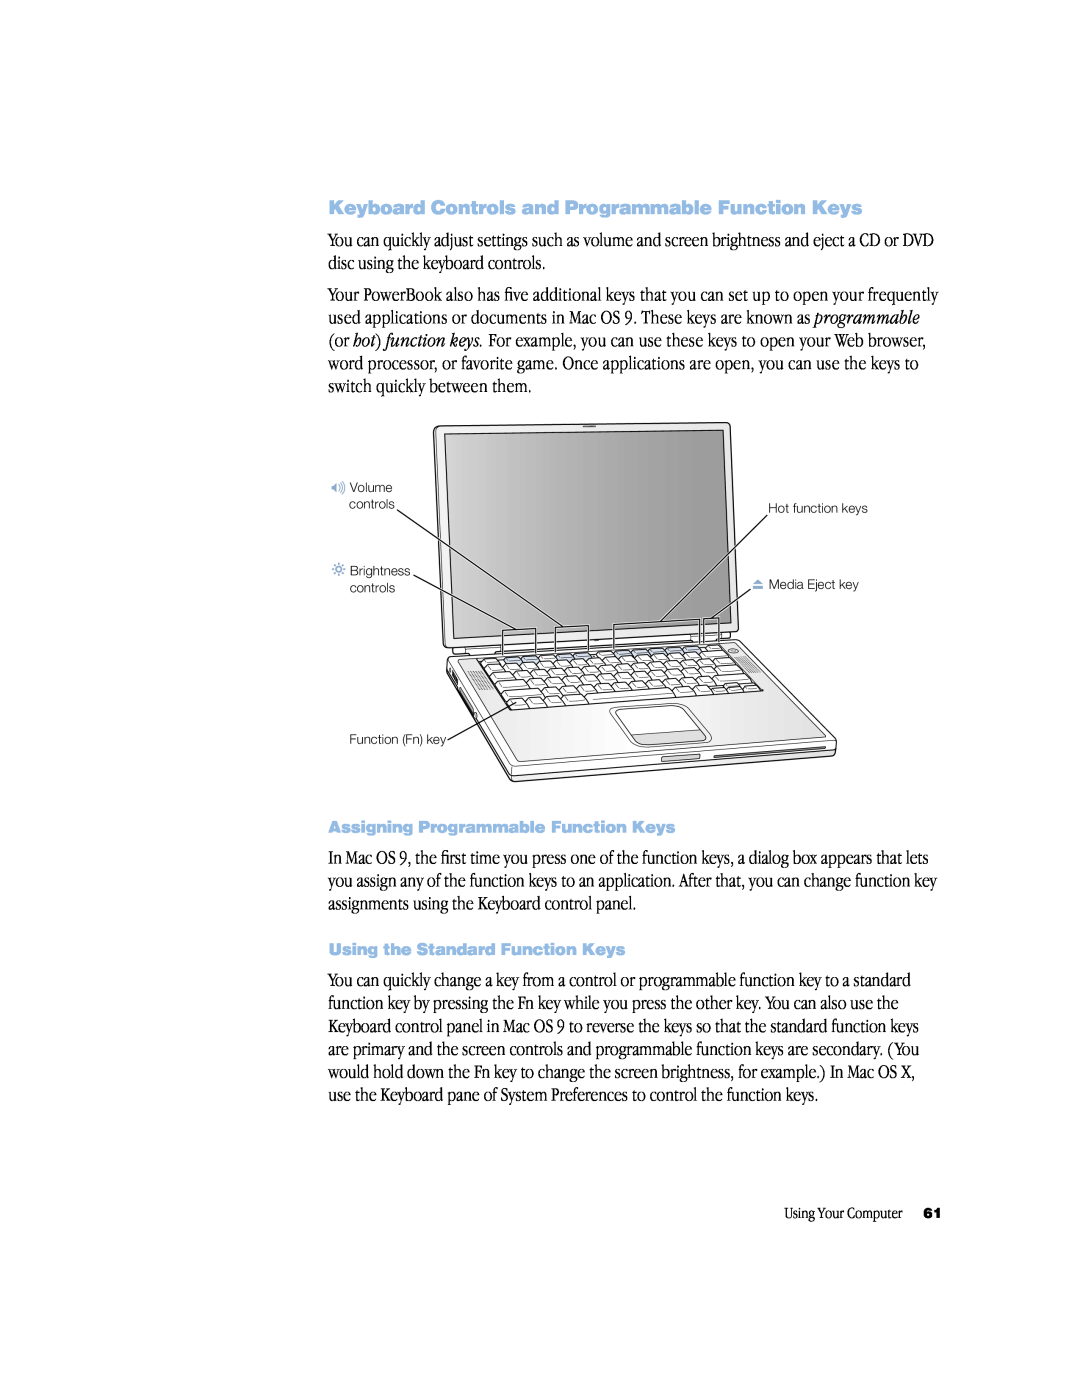 Apple powerbook g4 manual Keyboard Controls and Programmable Function Keys, Assigning Programmable Function Keys 